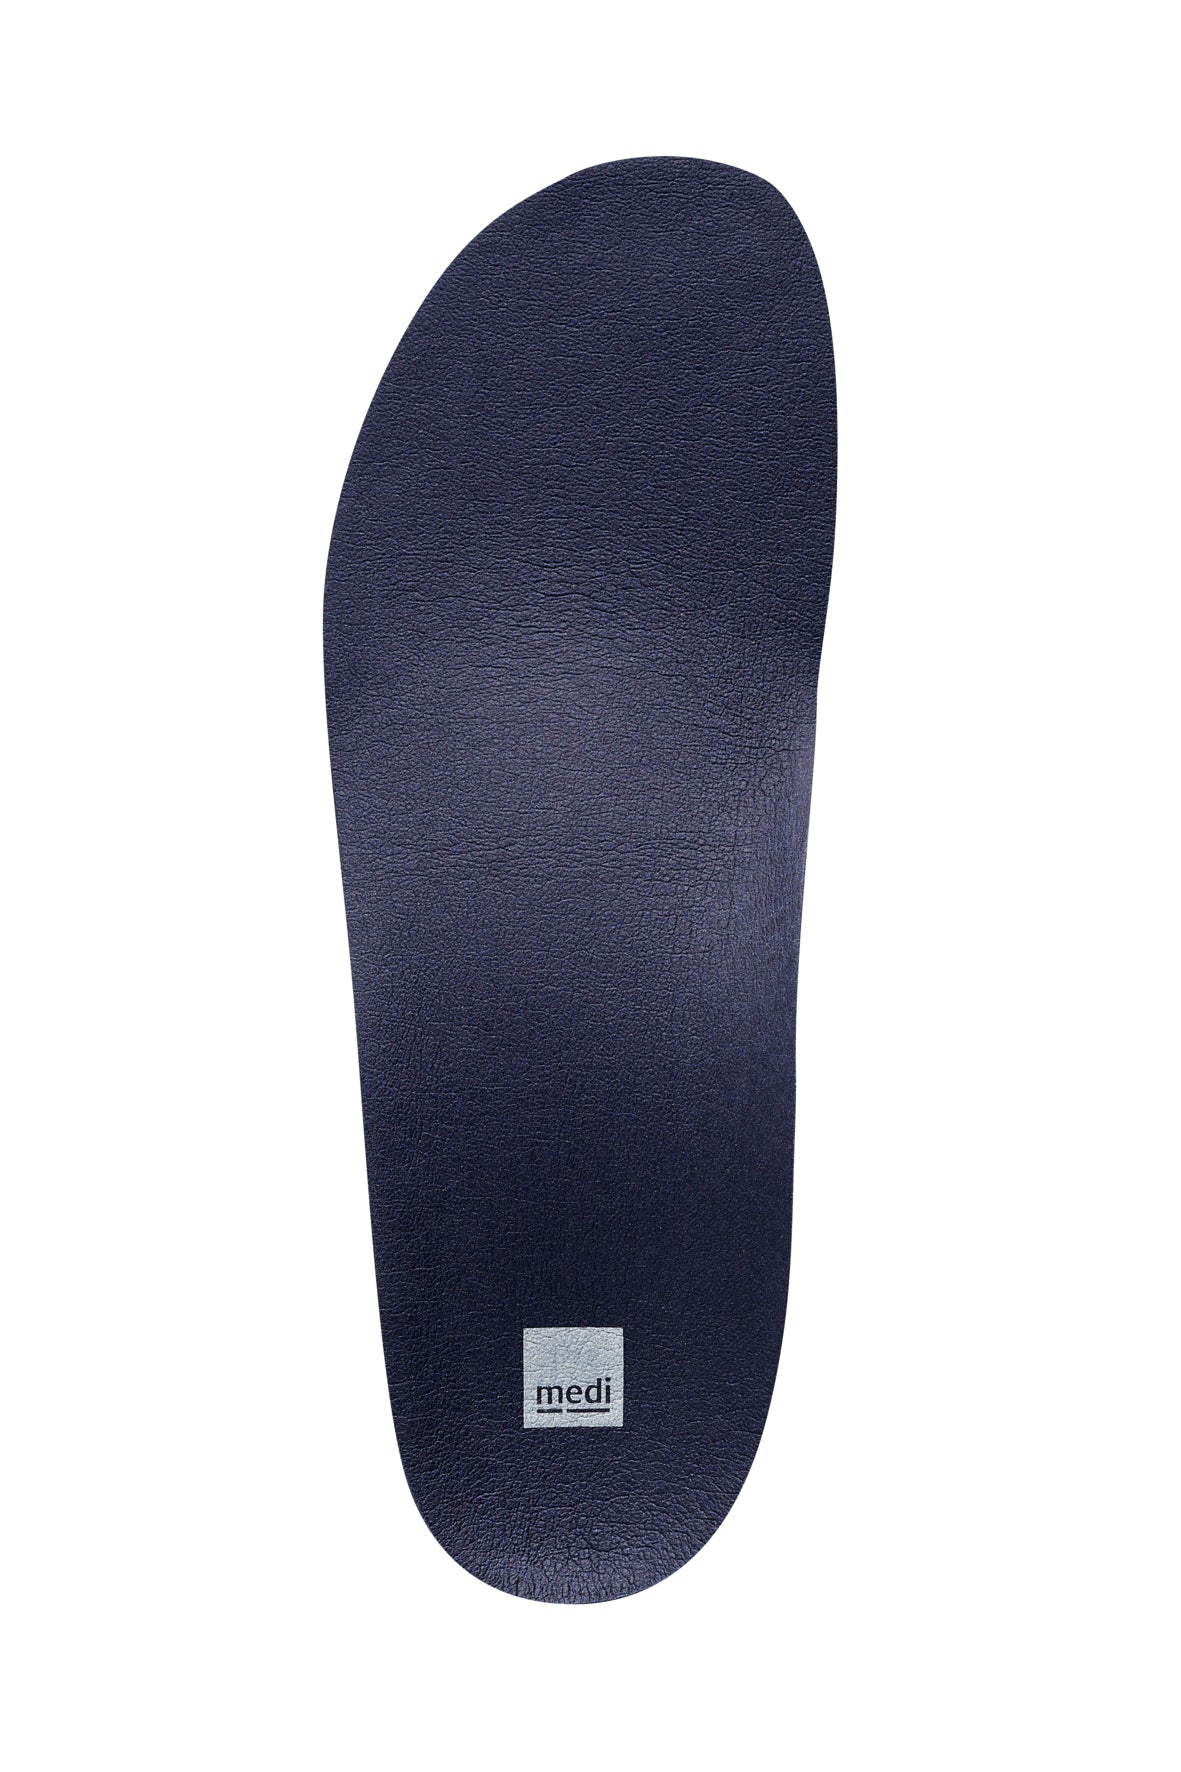 medi protect Comfort Insoles, Top View